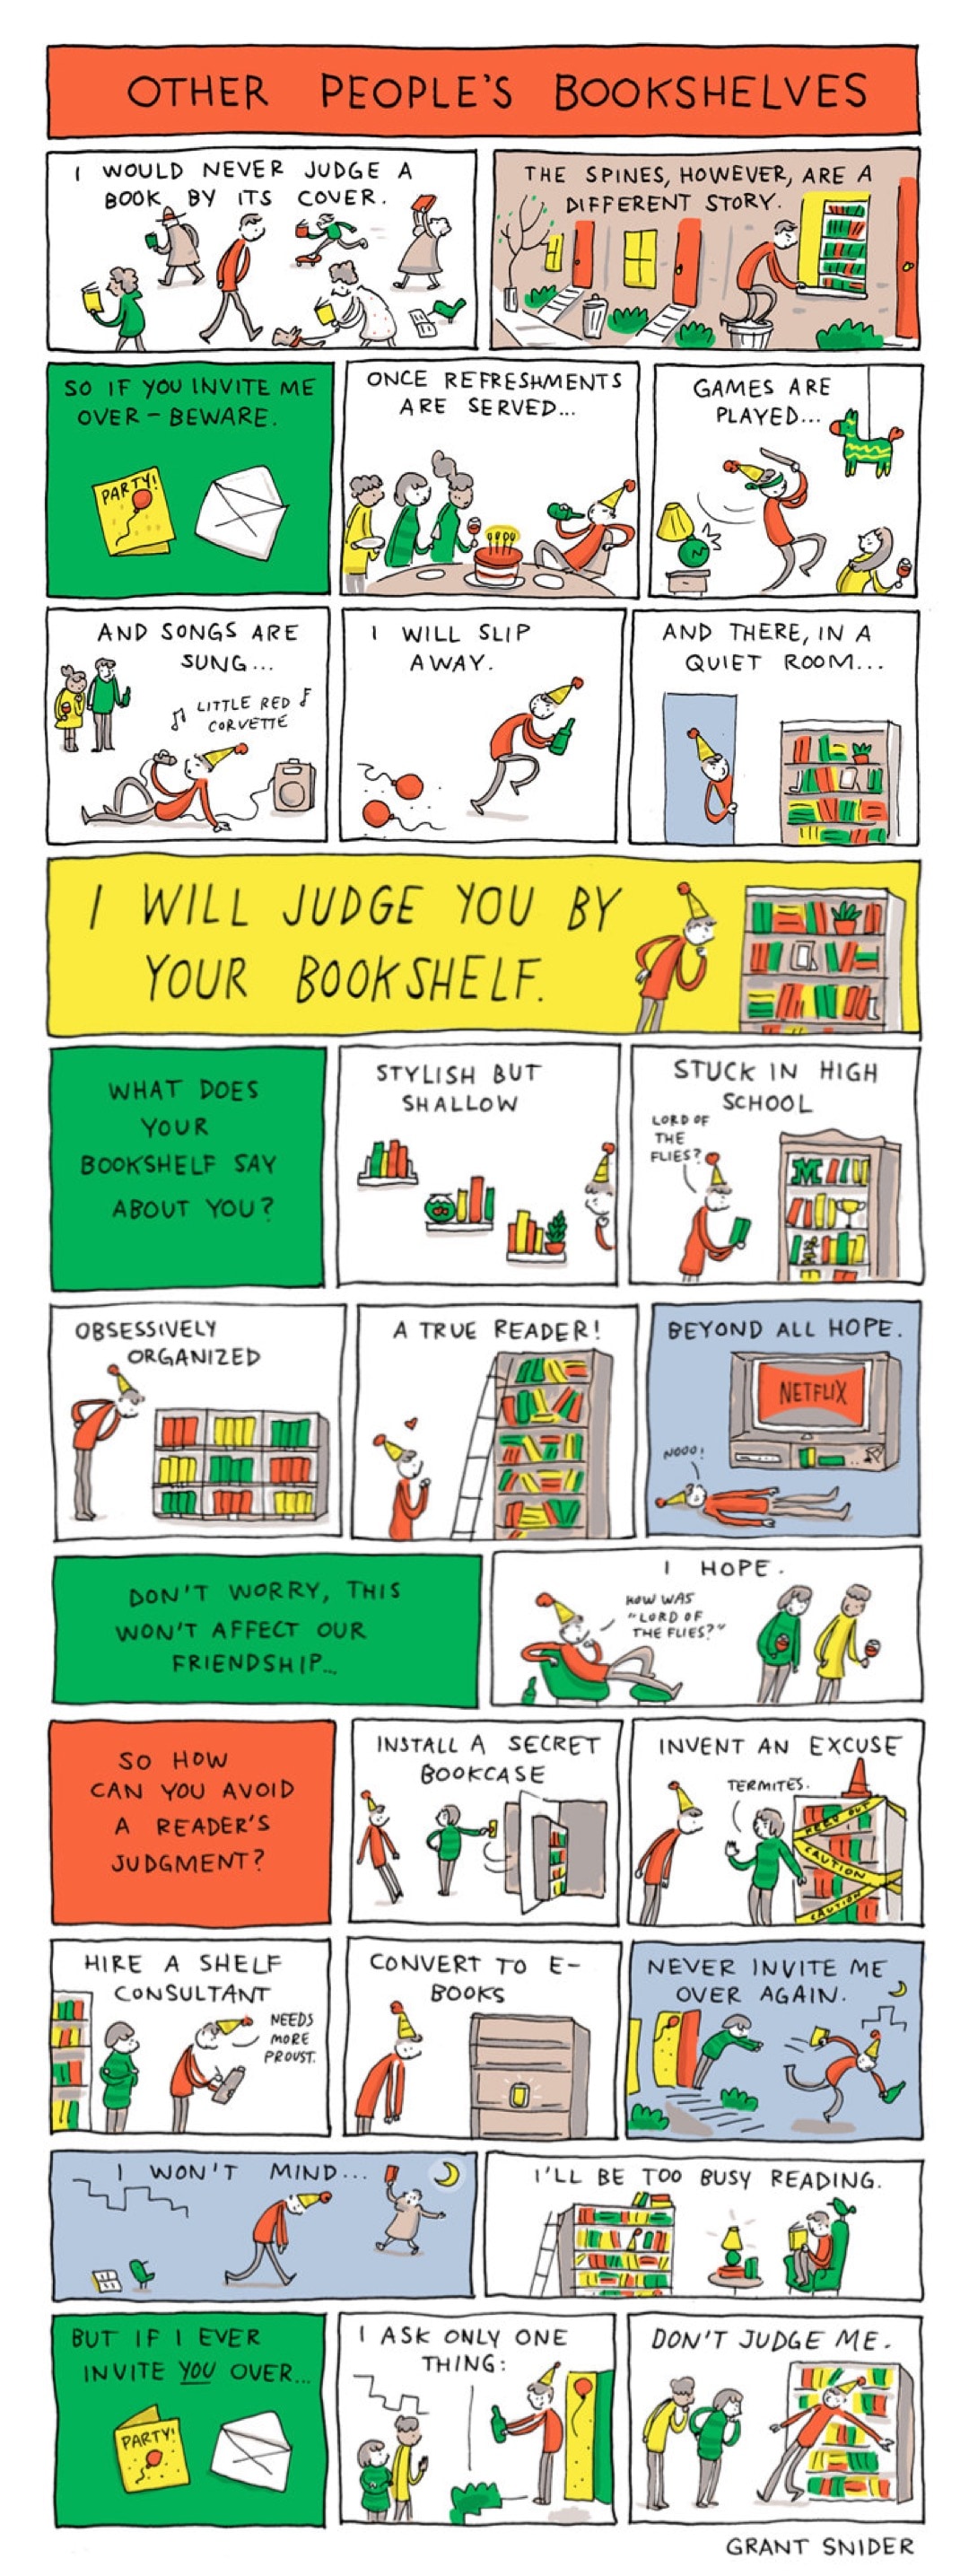 Other People's Bookshelves cartoon by Grant Snider